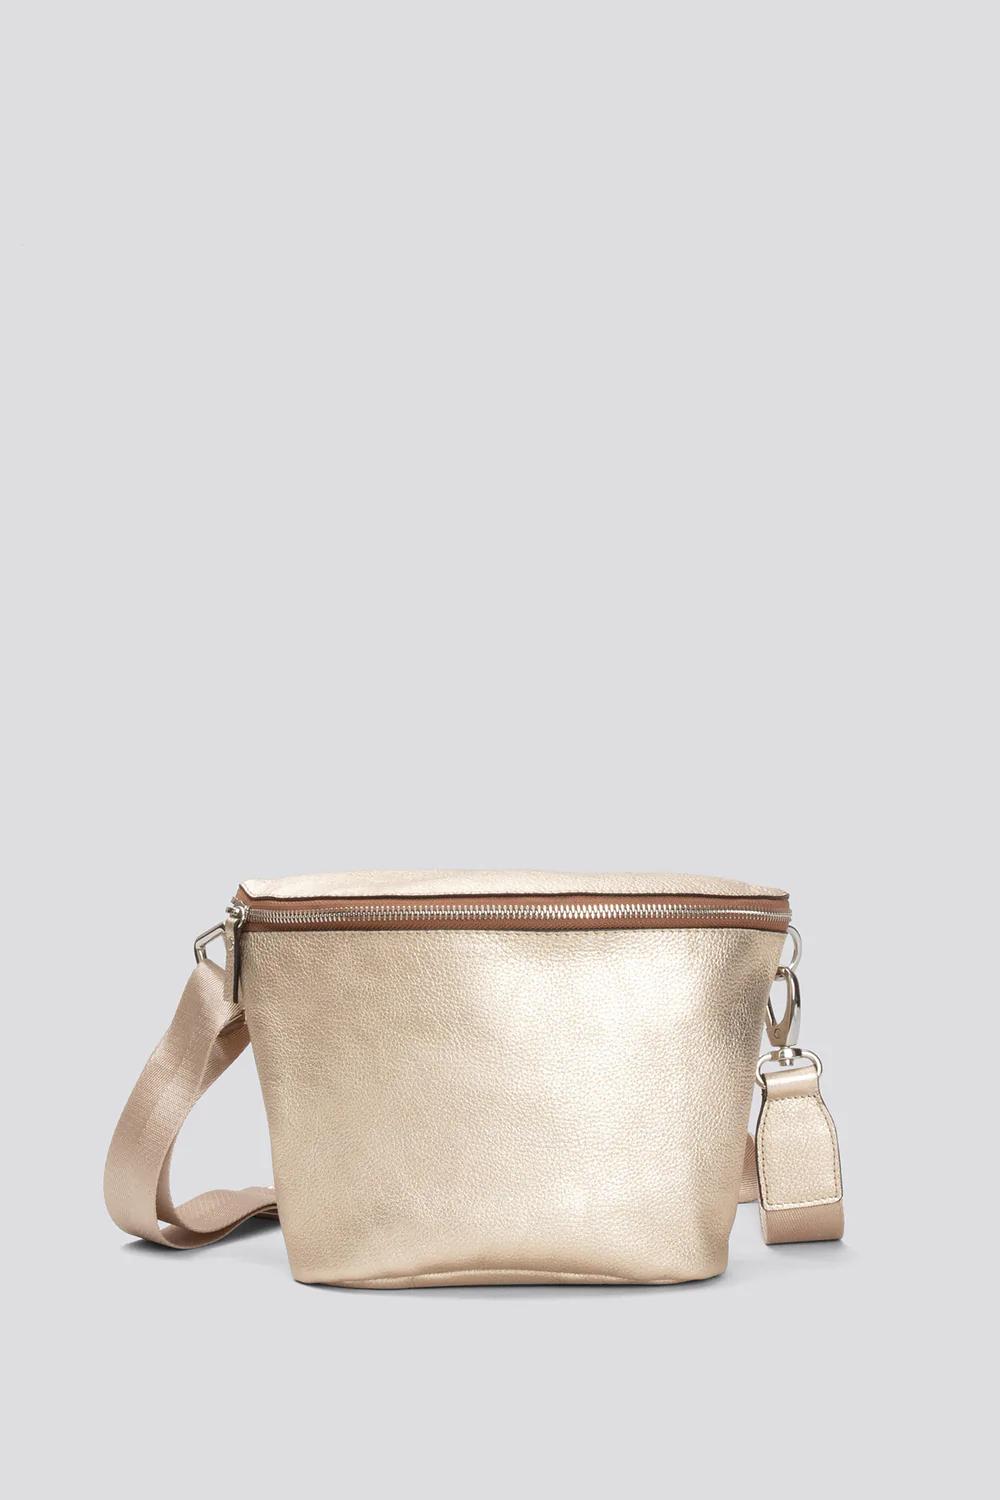 Product Image for Keno Leather Bag, Gold